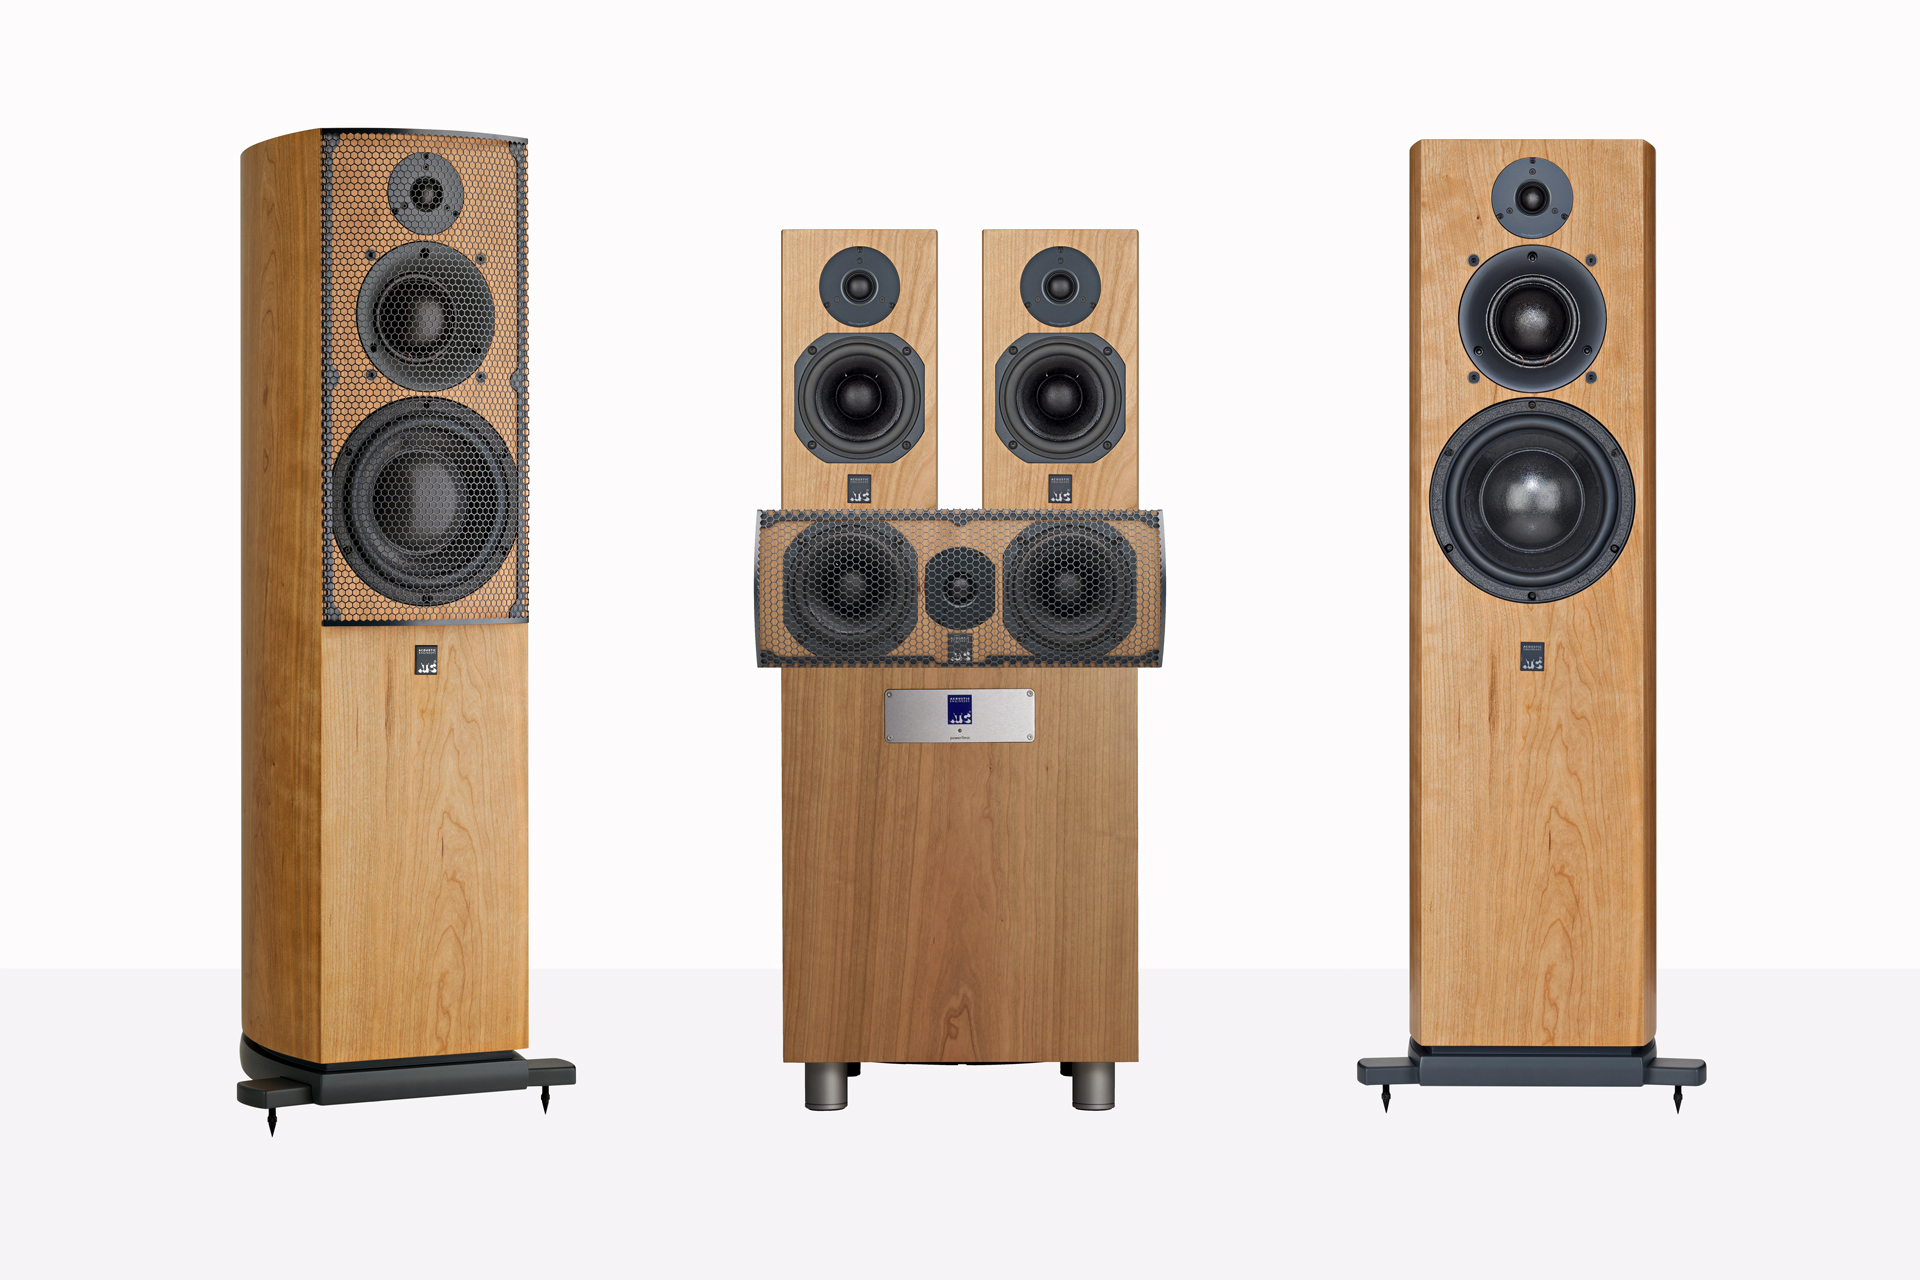 ATC SCM40 5.1 home theater system